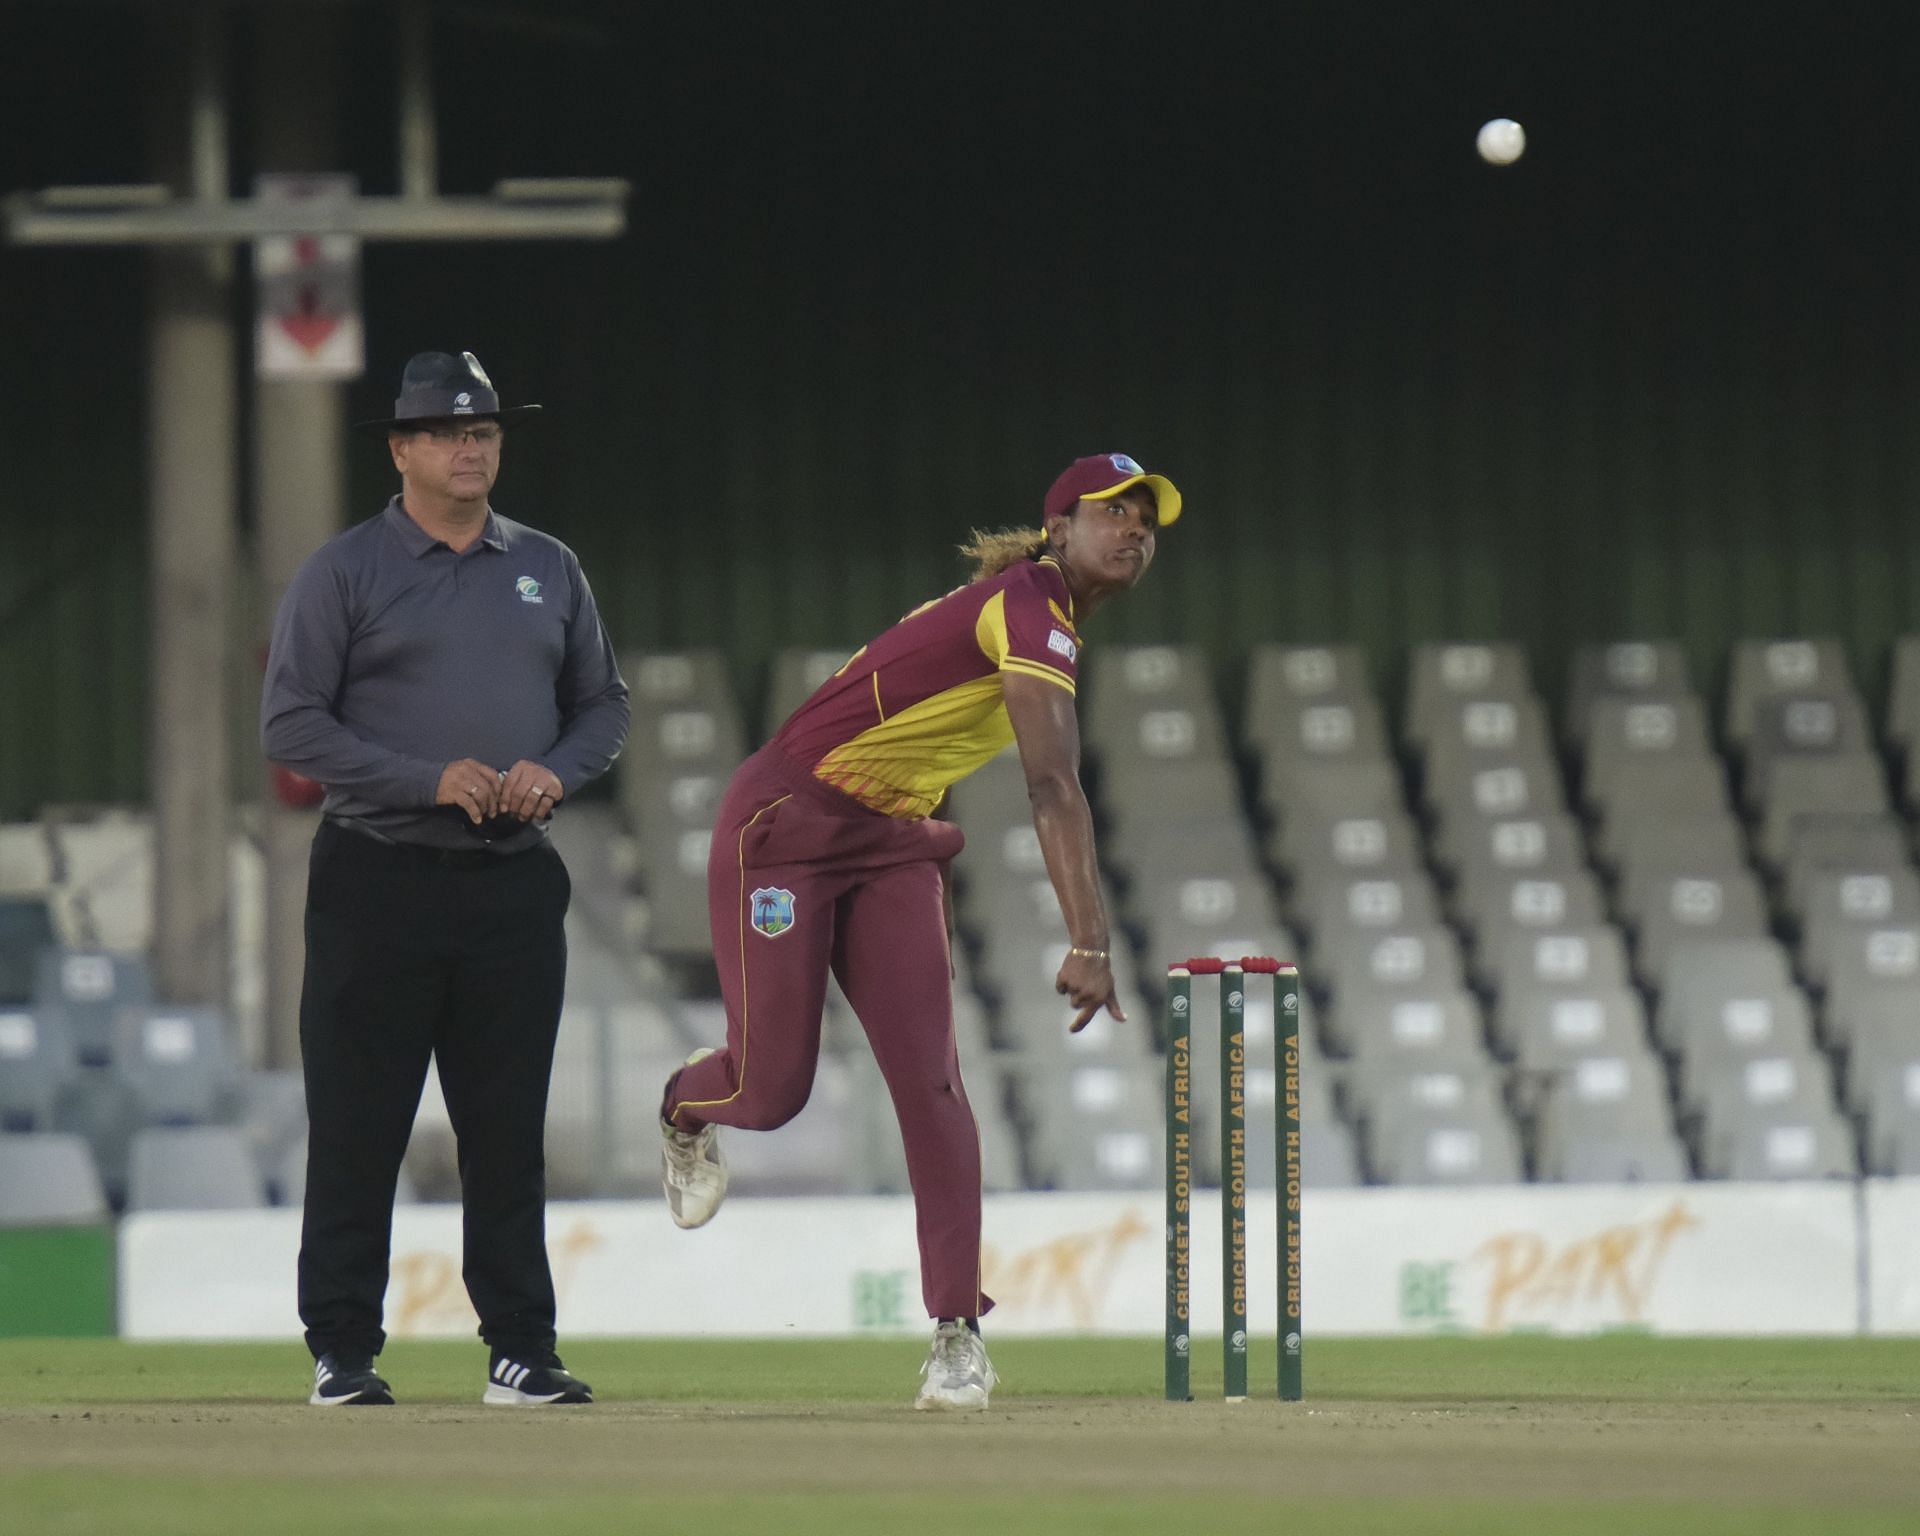 West Indies Women vs Ireland Women, 3rd T20I: Probable XIs, Match Prediction, Pitch Report, Weather Forecast, and Live Streaming Details